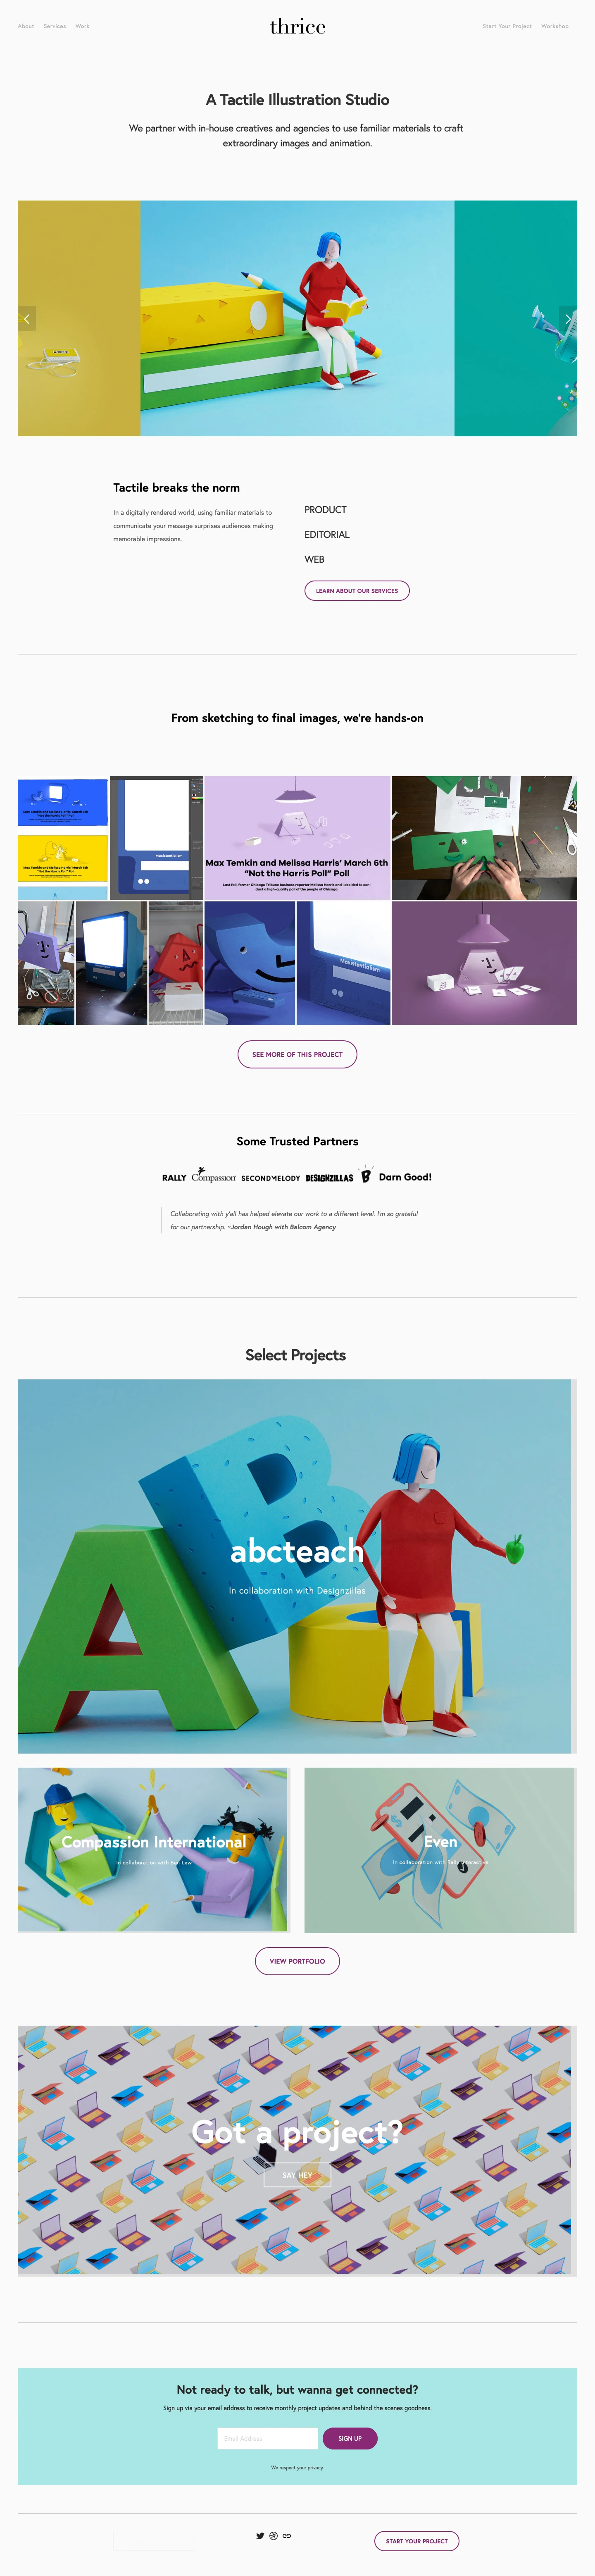 Thrice Studio Landing Page Example: We partner with in-house creatives and agencies to use familiar materials to craft extraordinary images and animation.